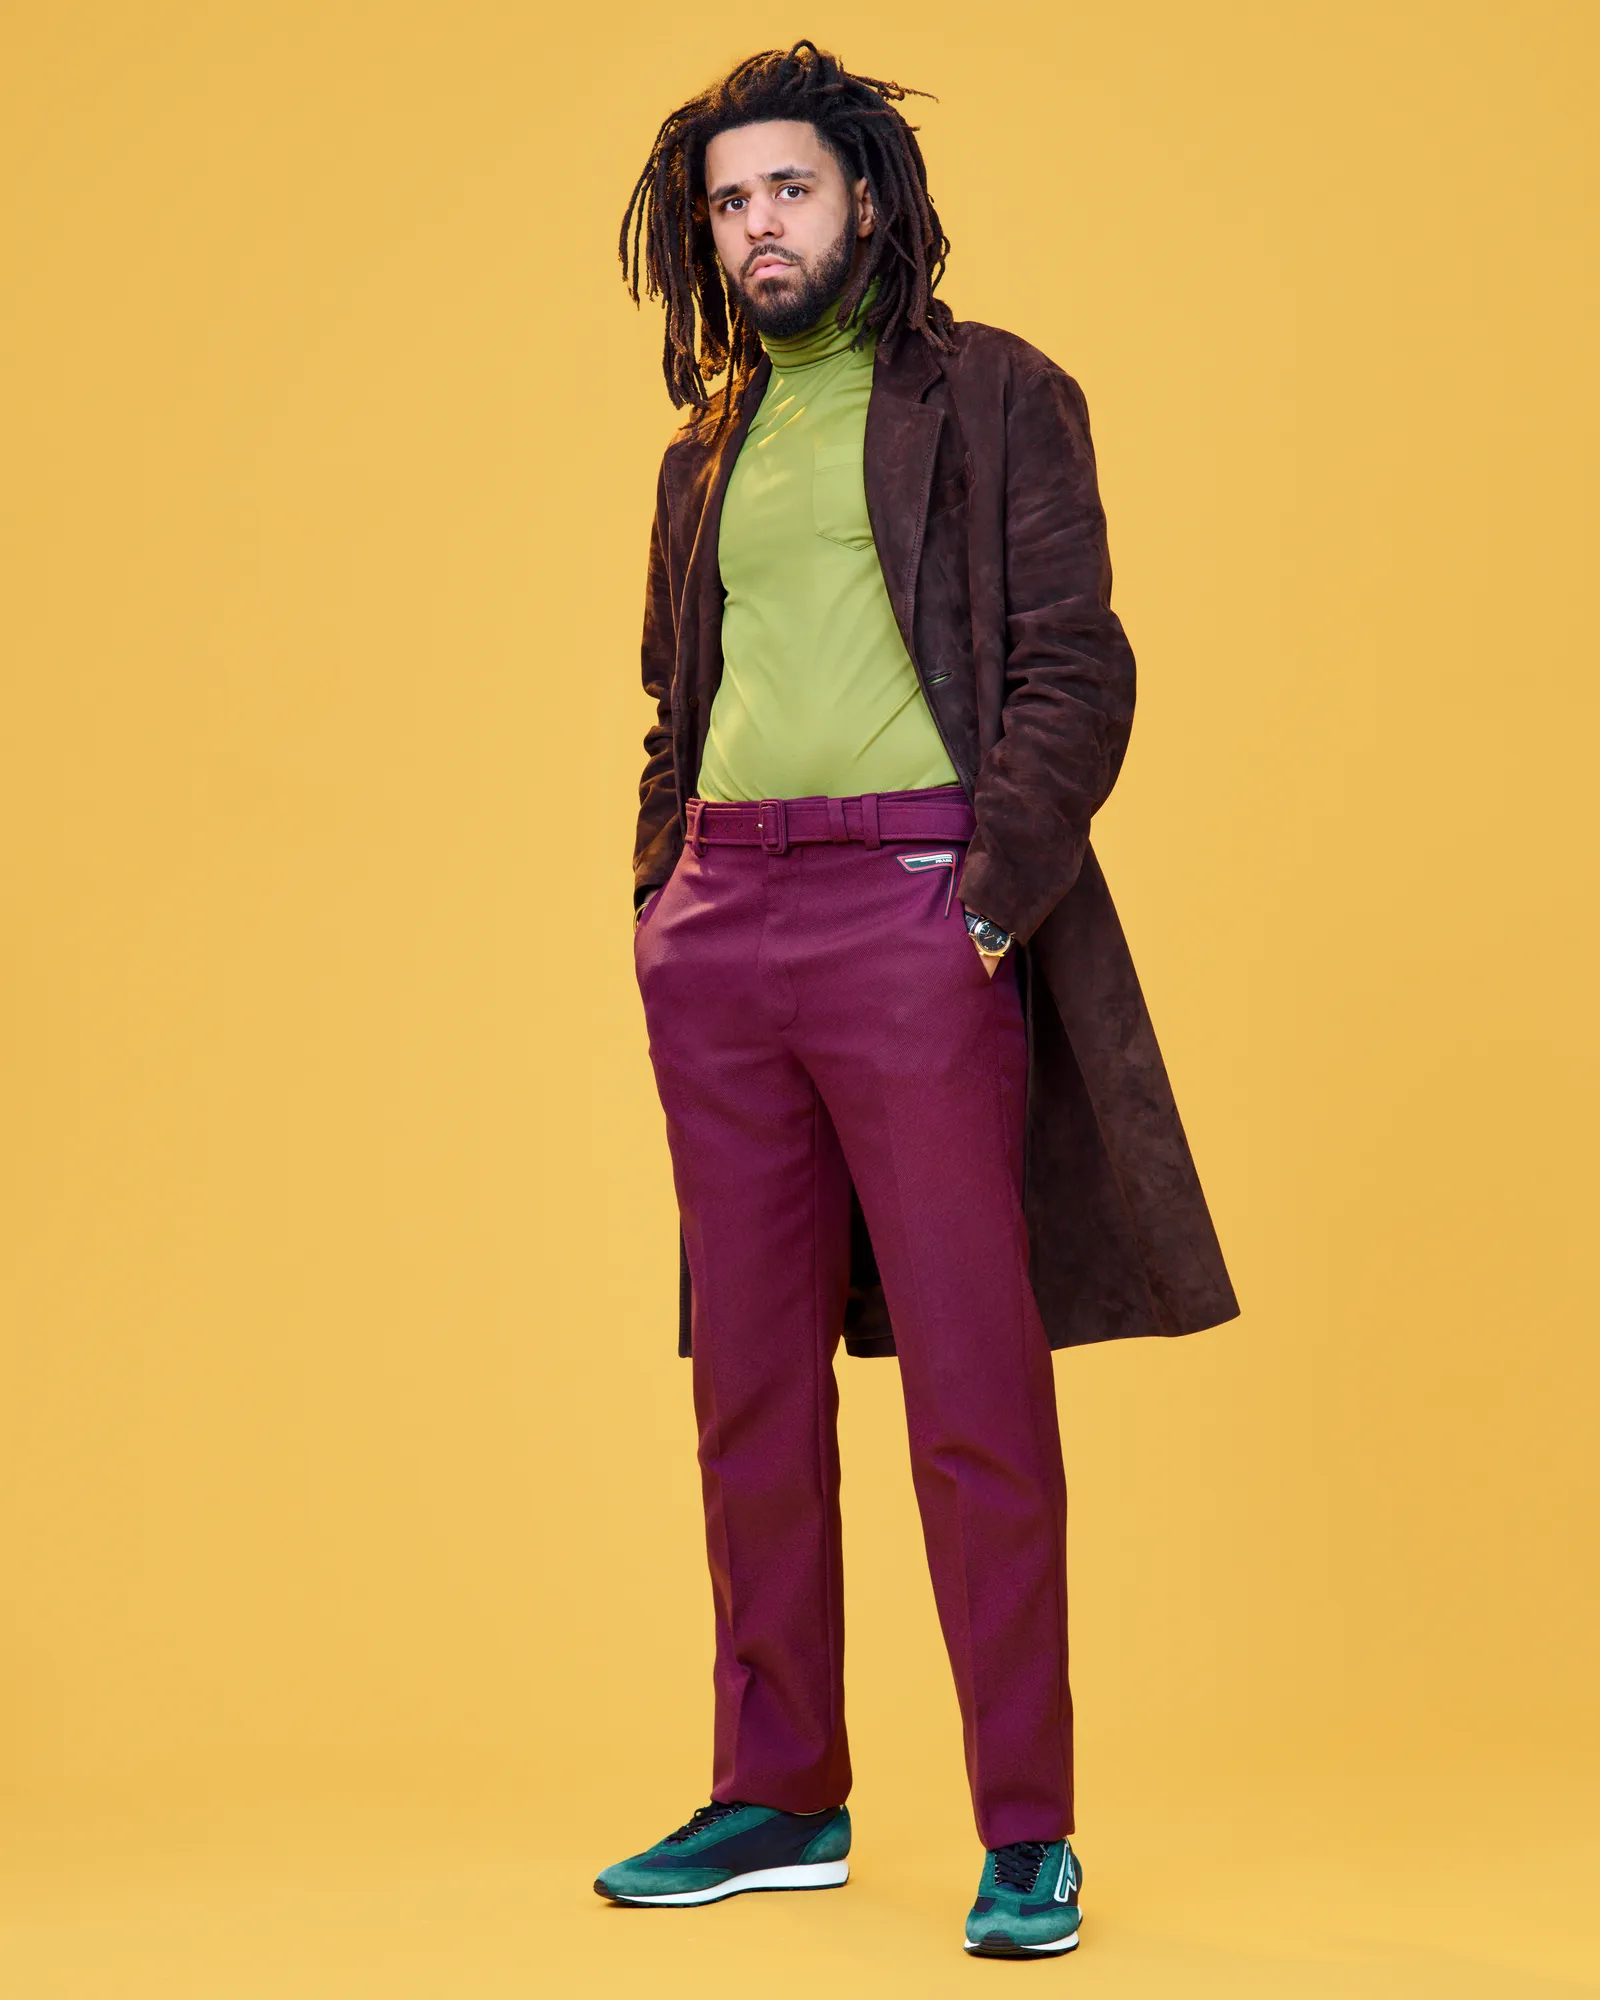 J.cole posing behind a yellow background